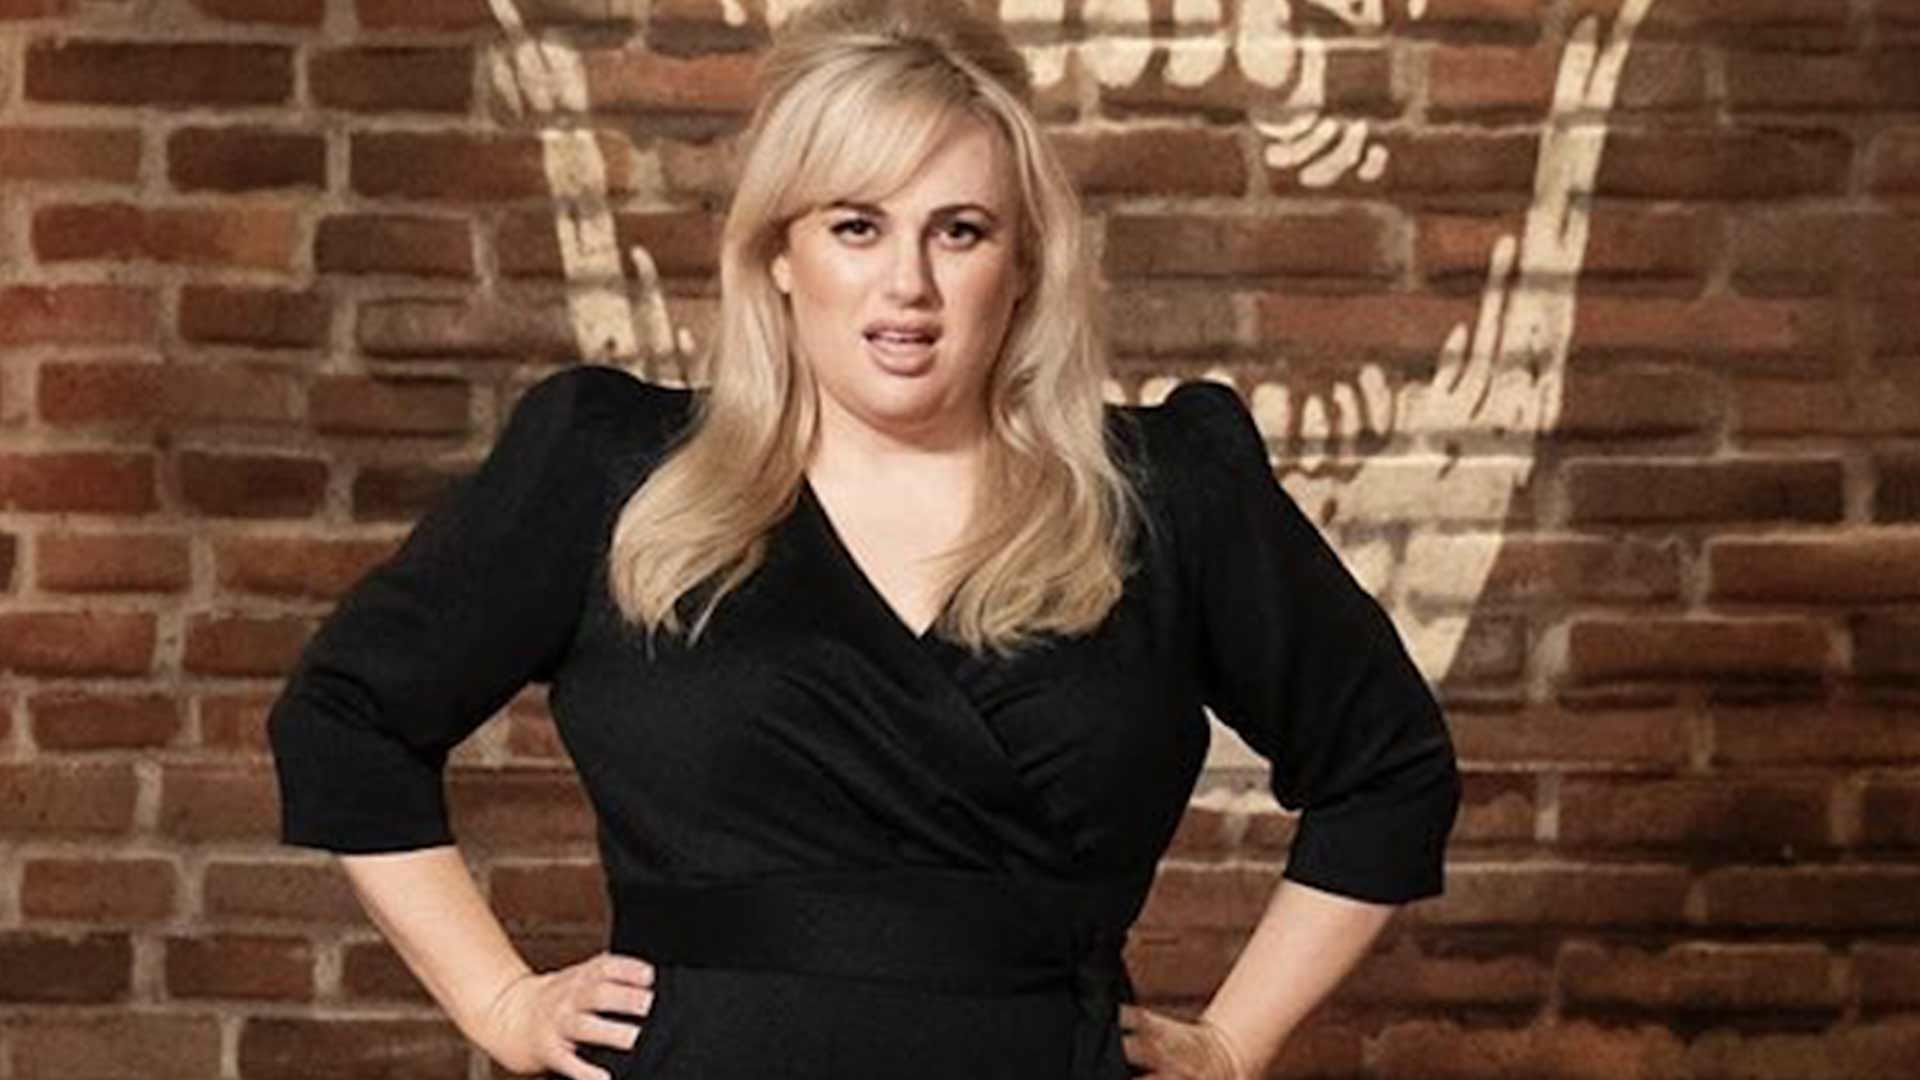 Rebel Wilson shows off her weight loss transformation in 